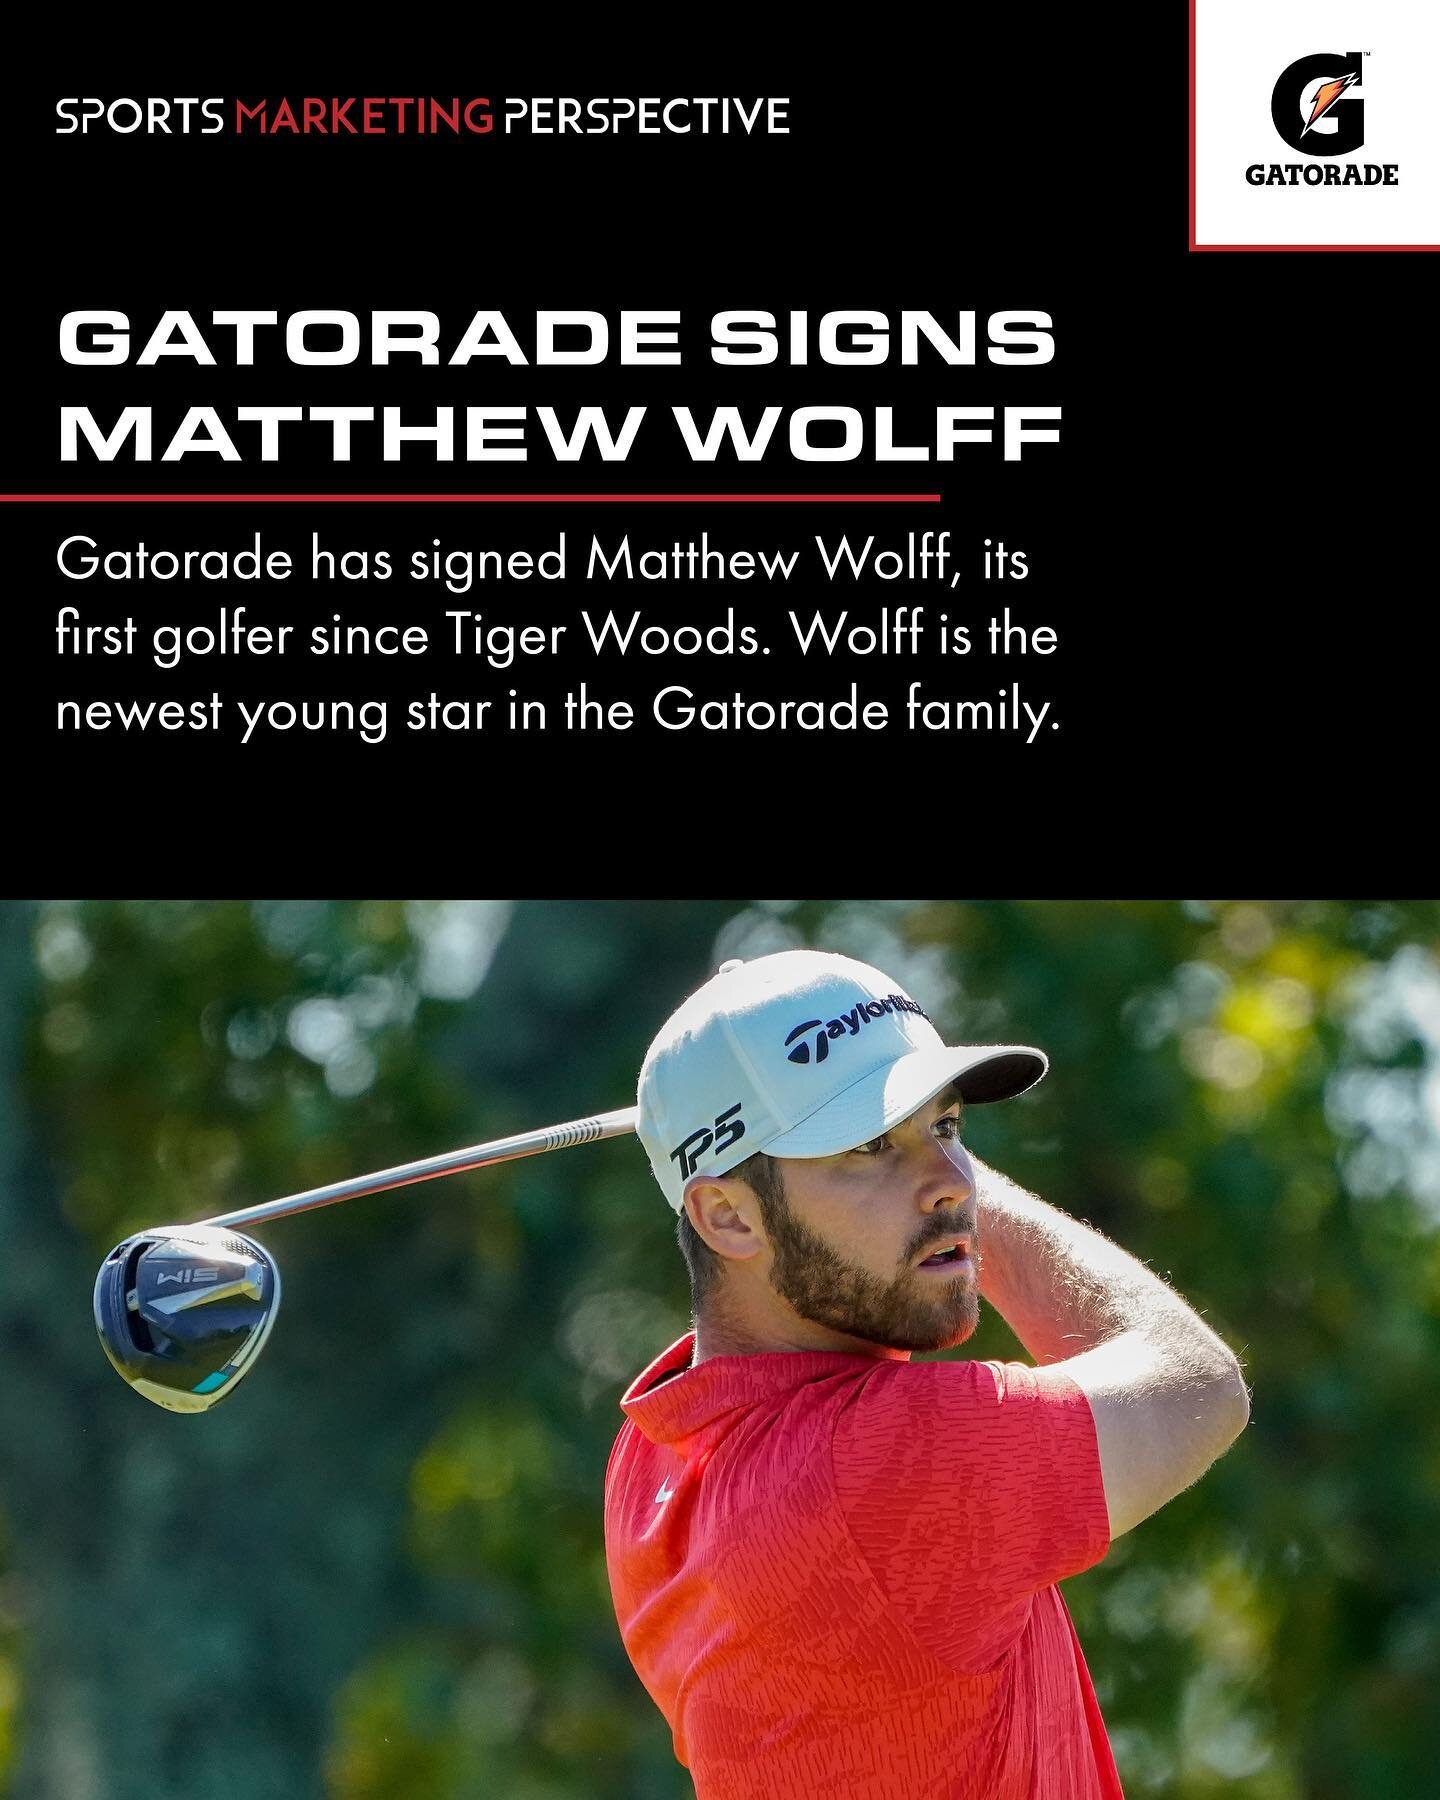 Gatorade has signed Matthew Wolff, its first golfer since Tiger Woods. He&rsquo;s the newest young star in the Gatorade family as it continues to evolve beyond the era of Michael Jordan, Mia Hamm, Derek Jeter and Peyton Manning. 

Who: At 21, Wolff i